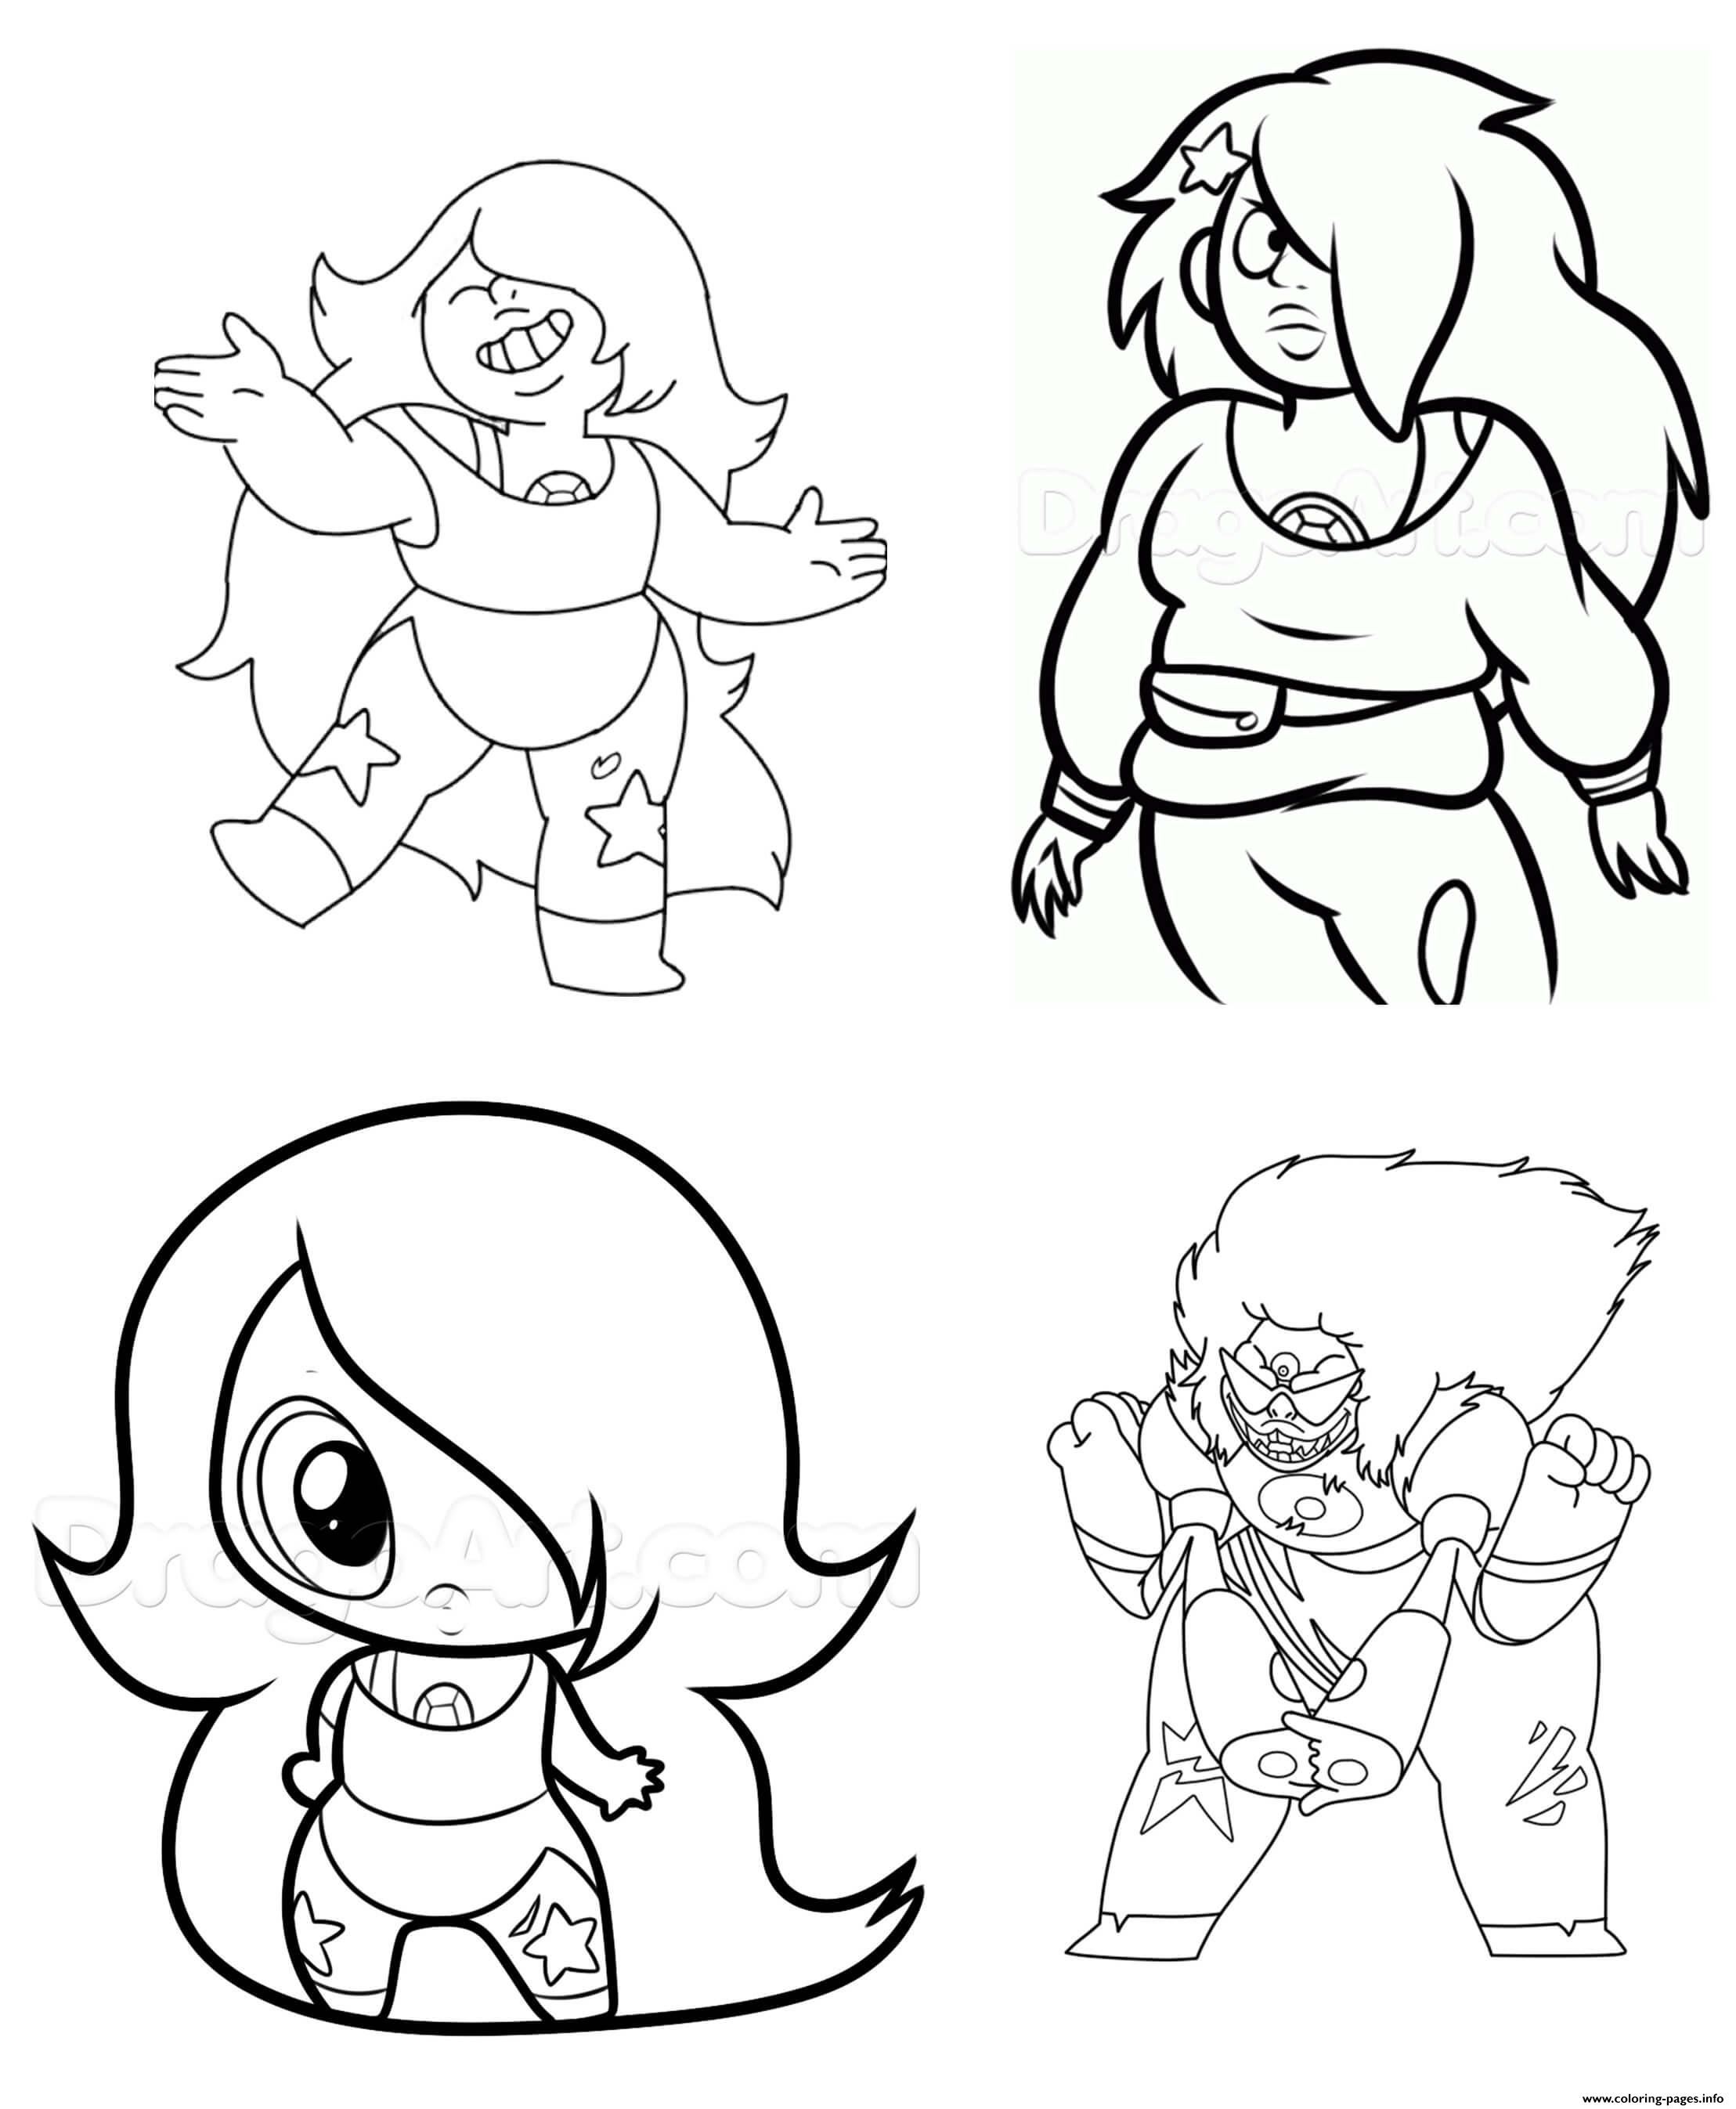 Download Amethyst Chibi Girls Steven Universe Coloring Pages Printable